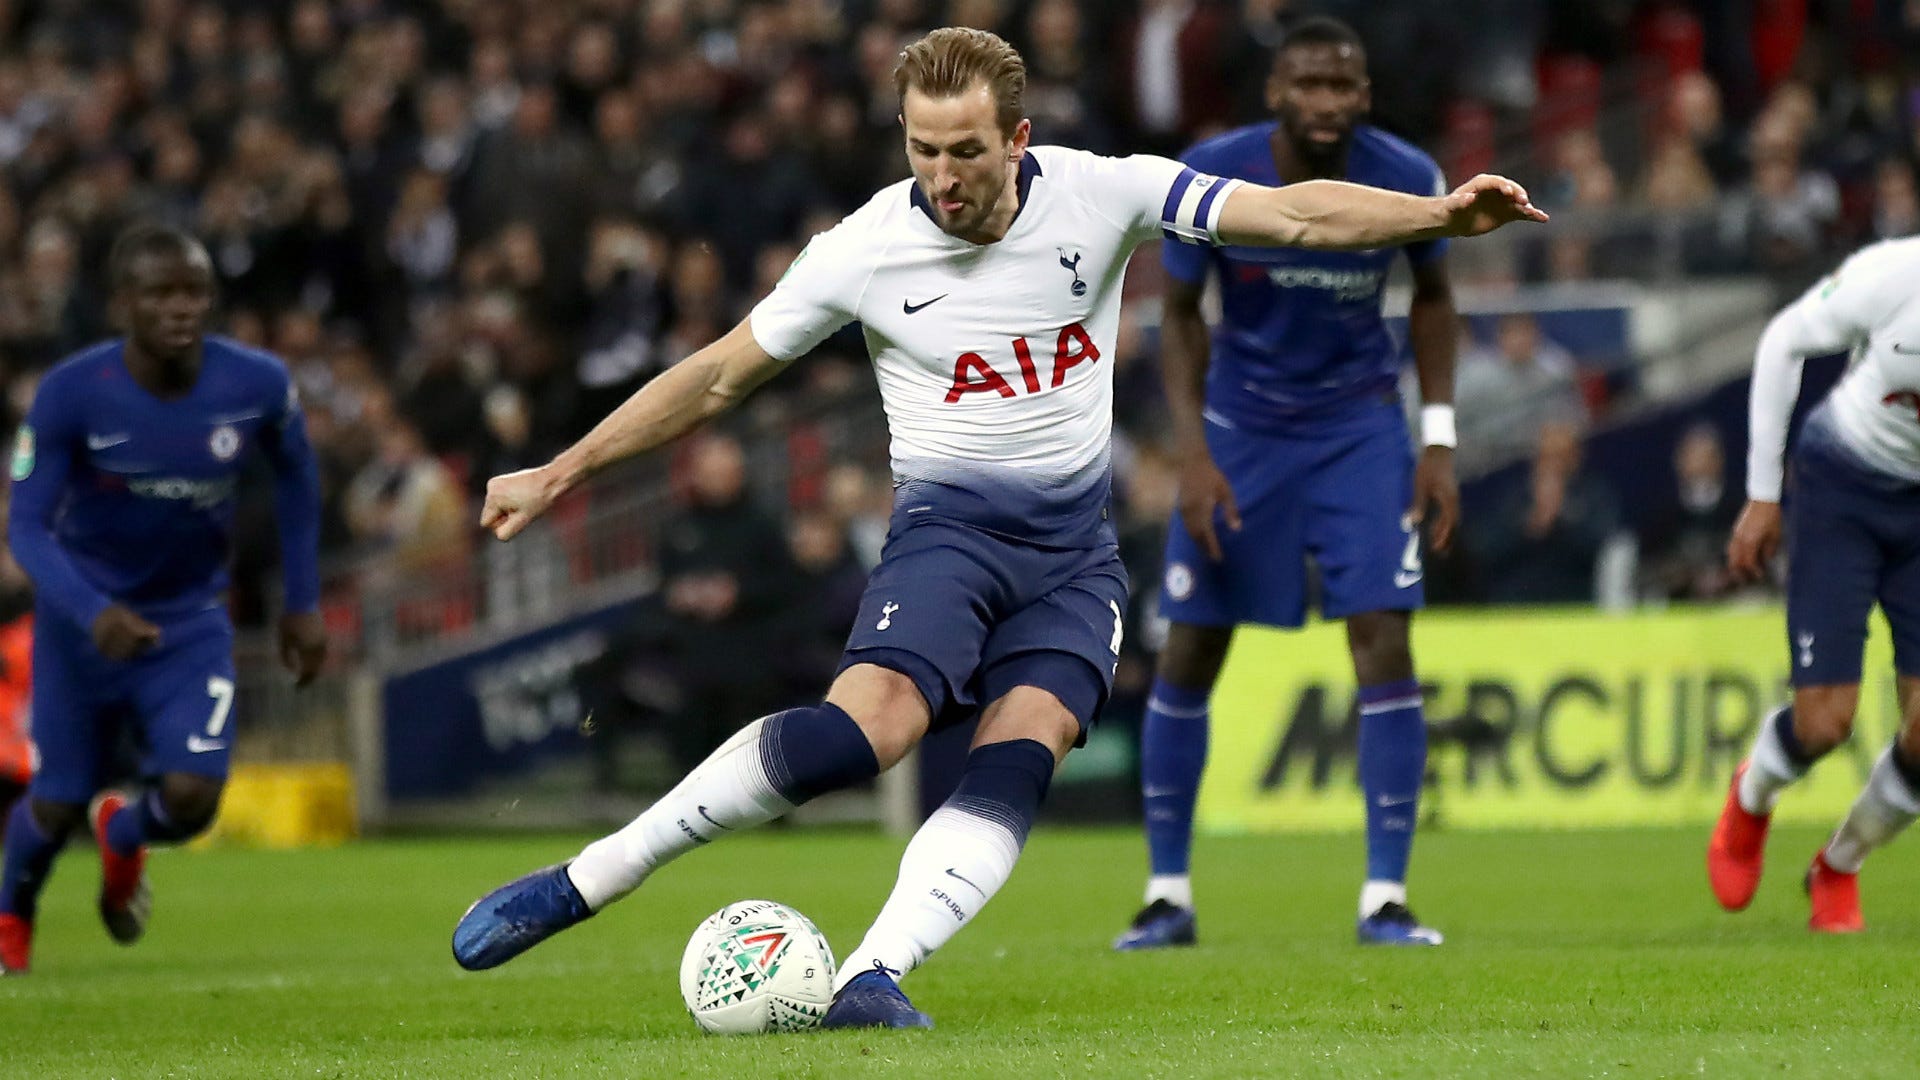  Harry Kane is seen scoring a goal past the Chelsea goalkeeper during a soccer match.